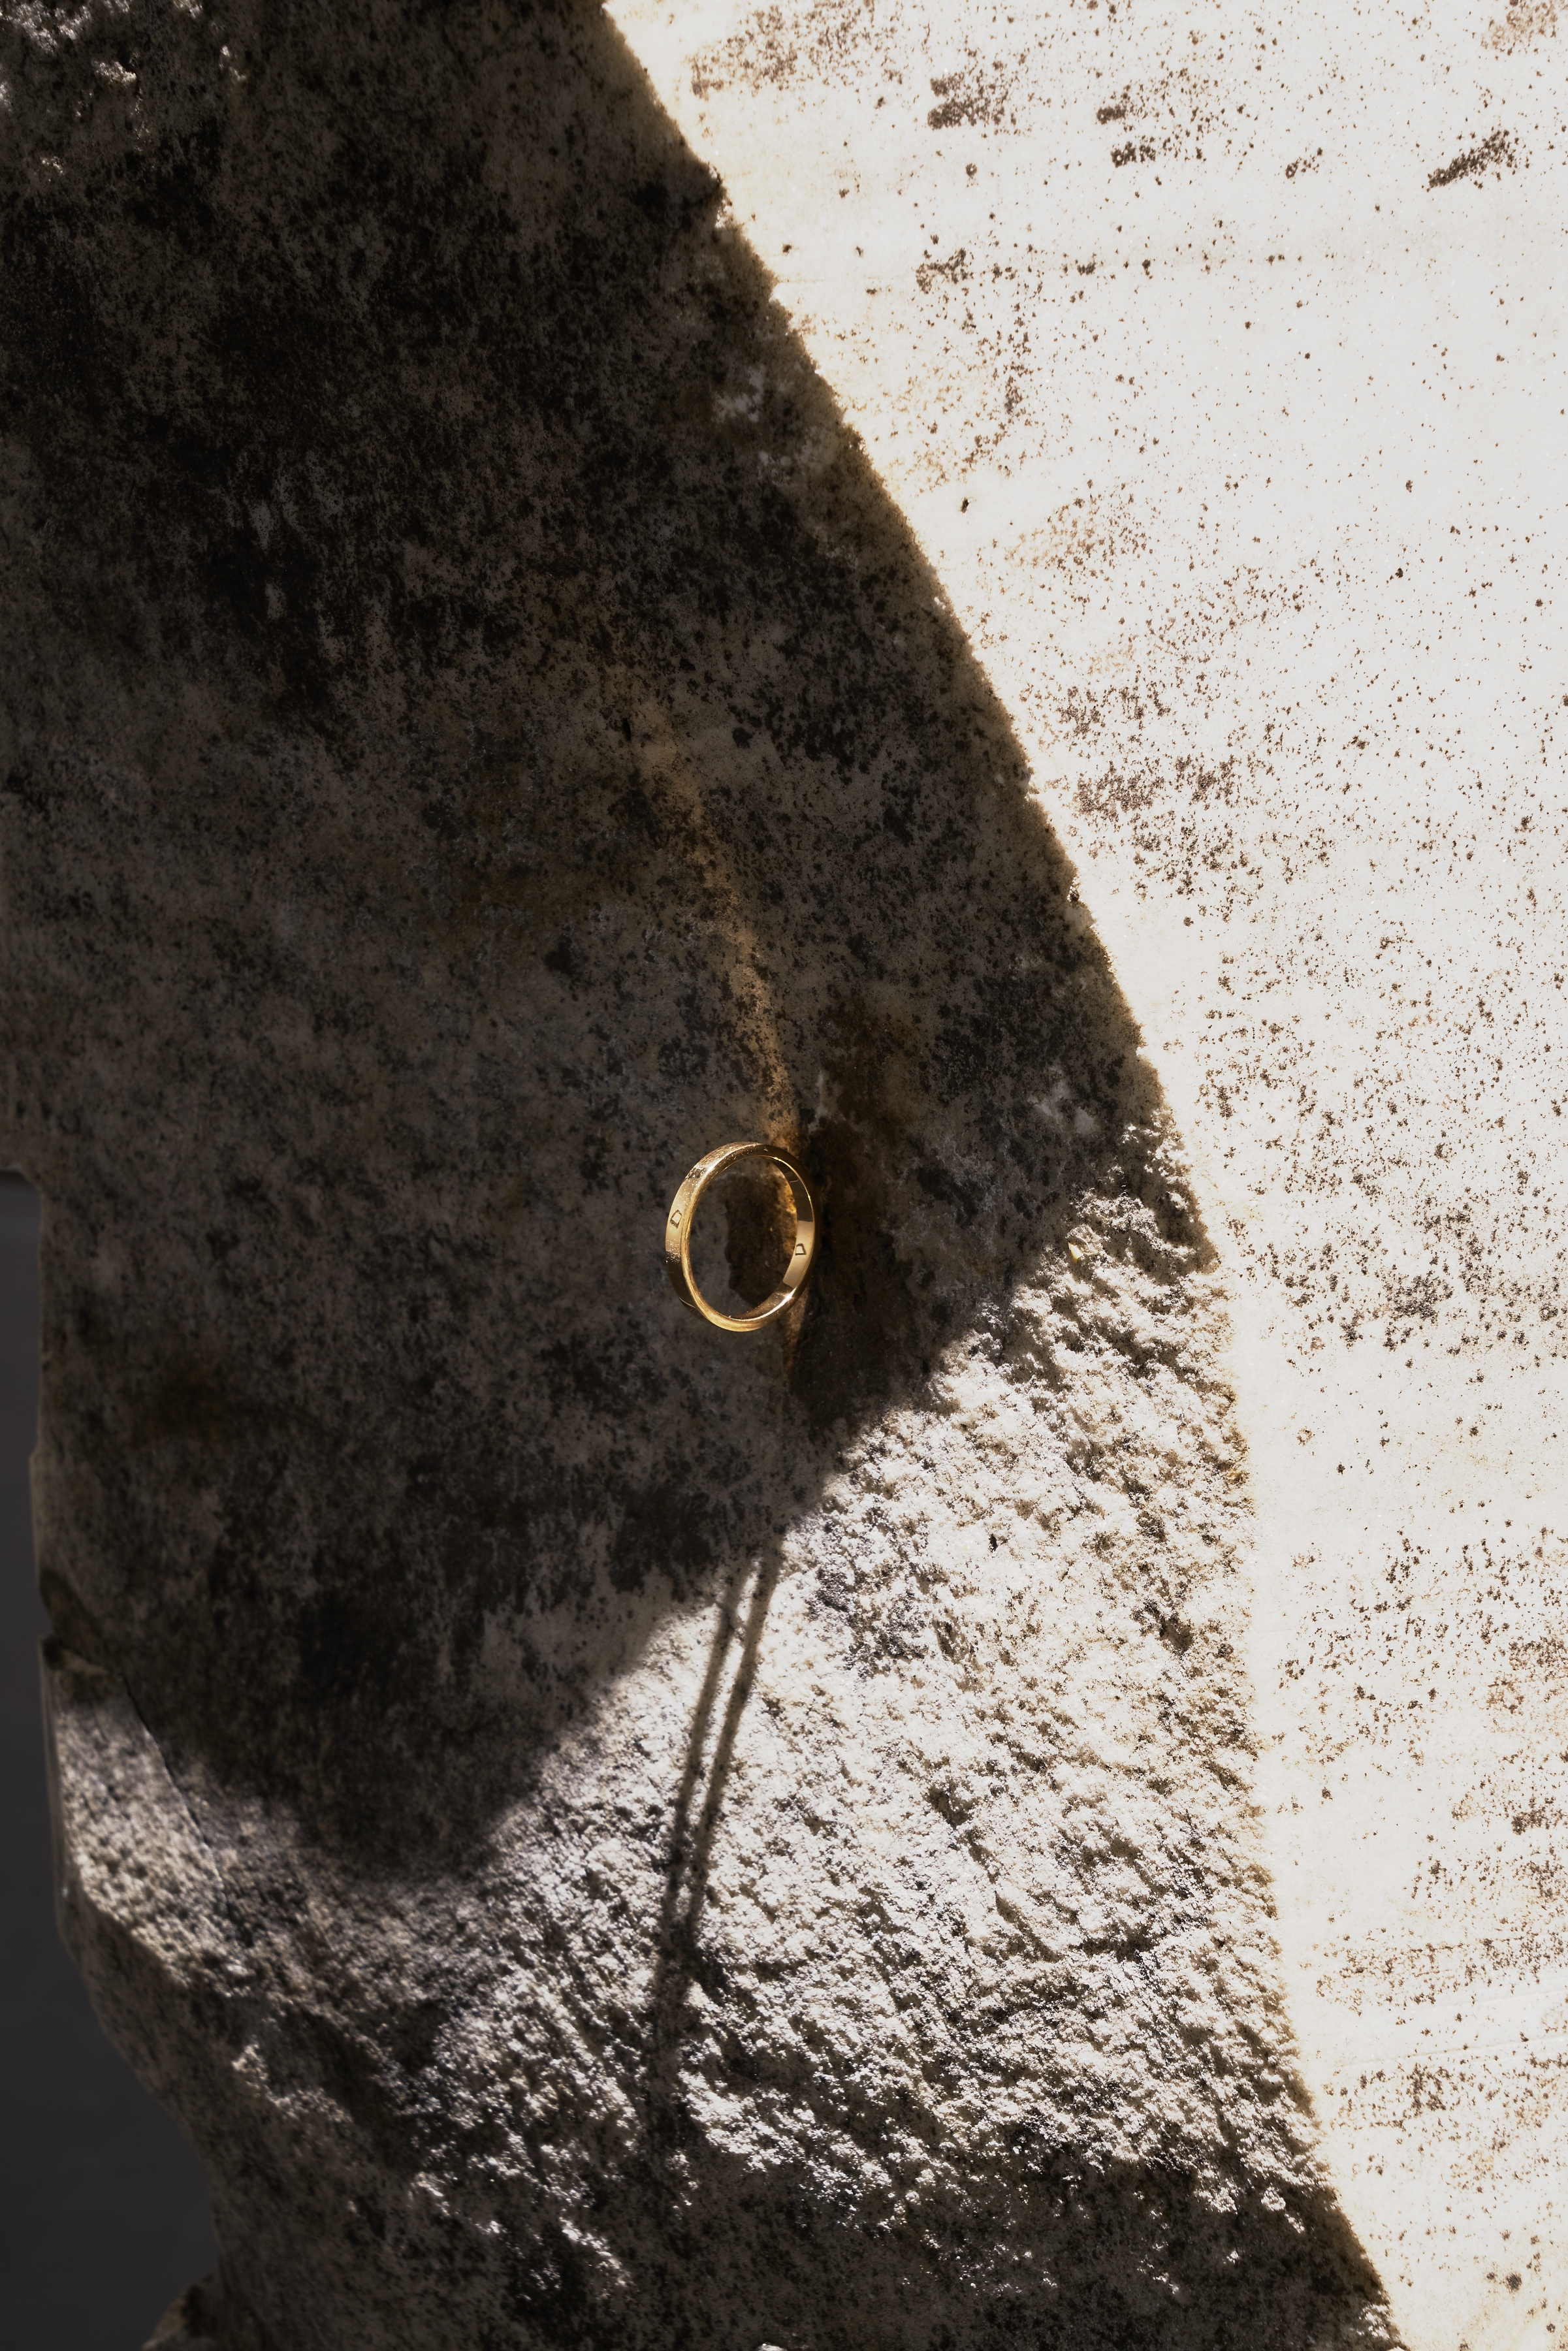 Solitary, 2019

marble, gold

&nbsp;

&nbsp;

When you wear this ring, you remain still, all alone.